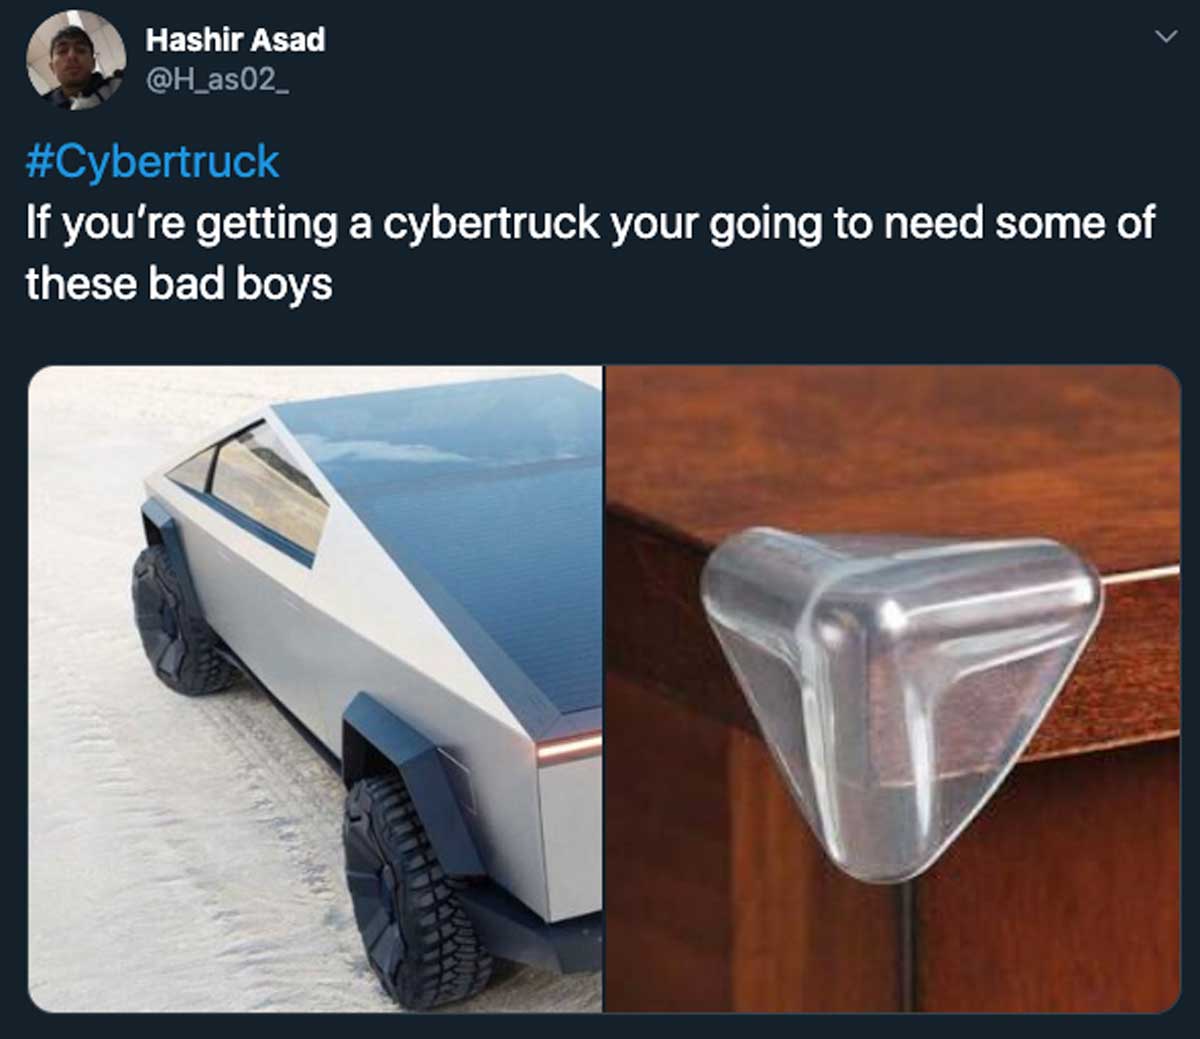 Cybertruck tweet of a the new cybertruck and a picture of a plastic corner cover for a desk with the caption ' If you're getting a cybertruck your going to need some of these bad boys'